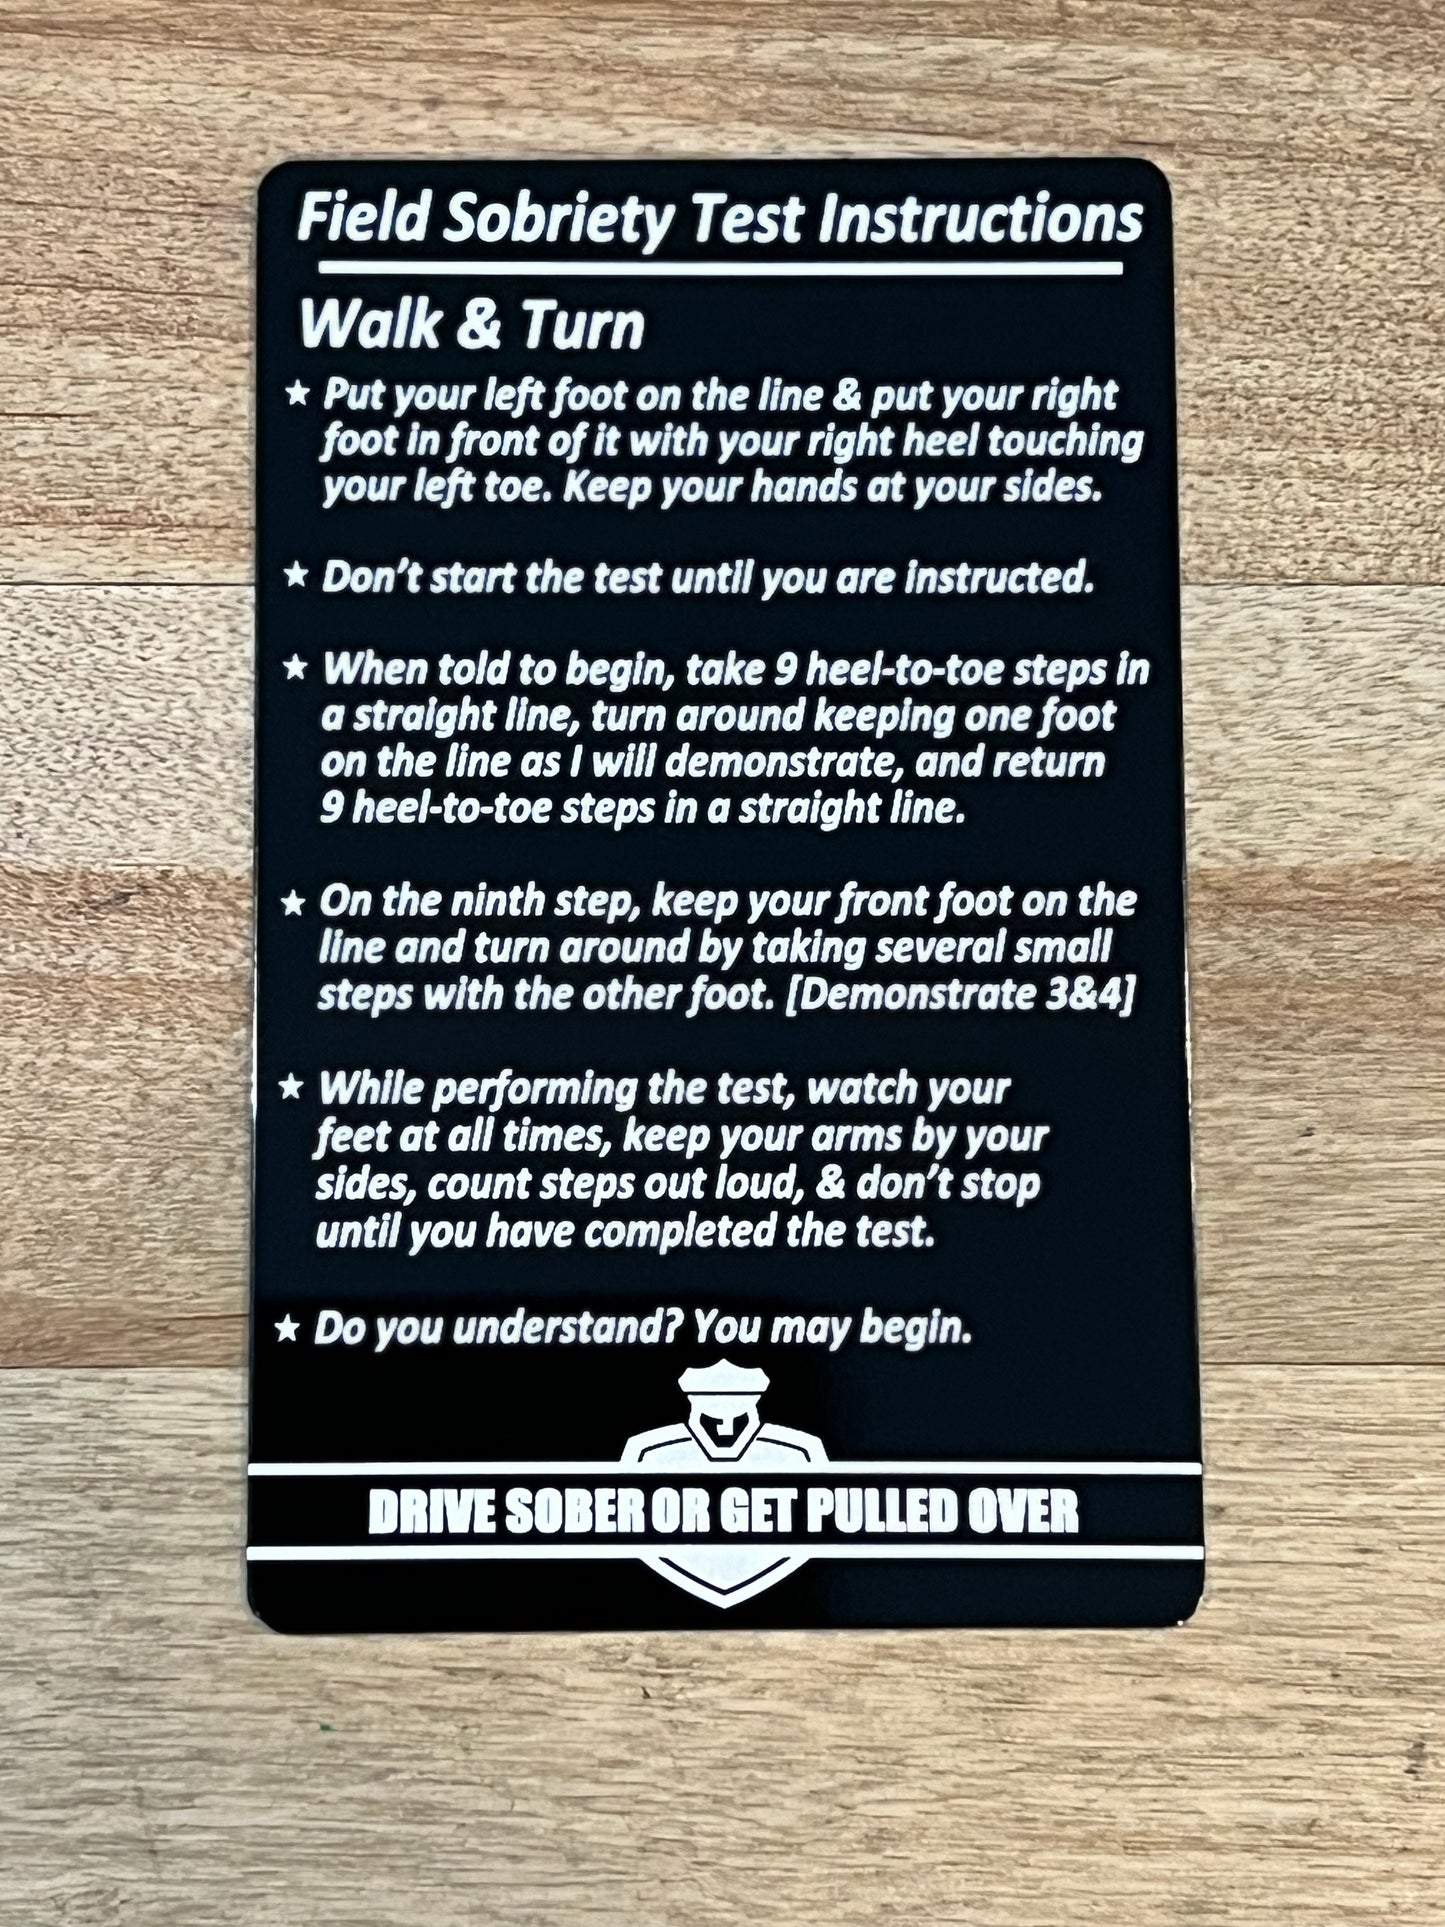 Standard Field Sobriety Test Instructions Card